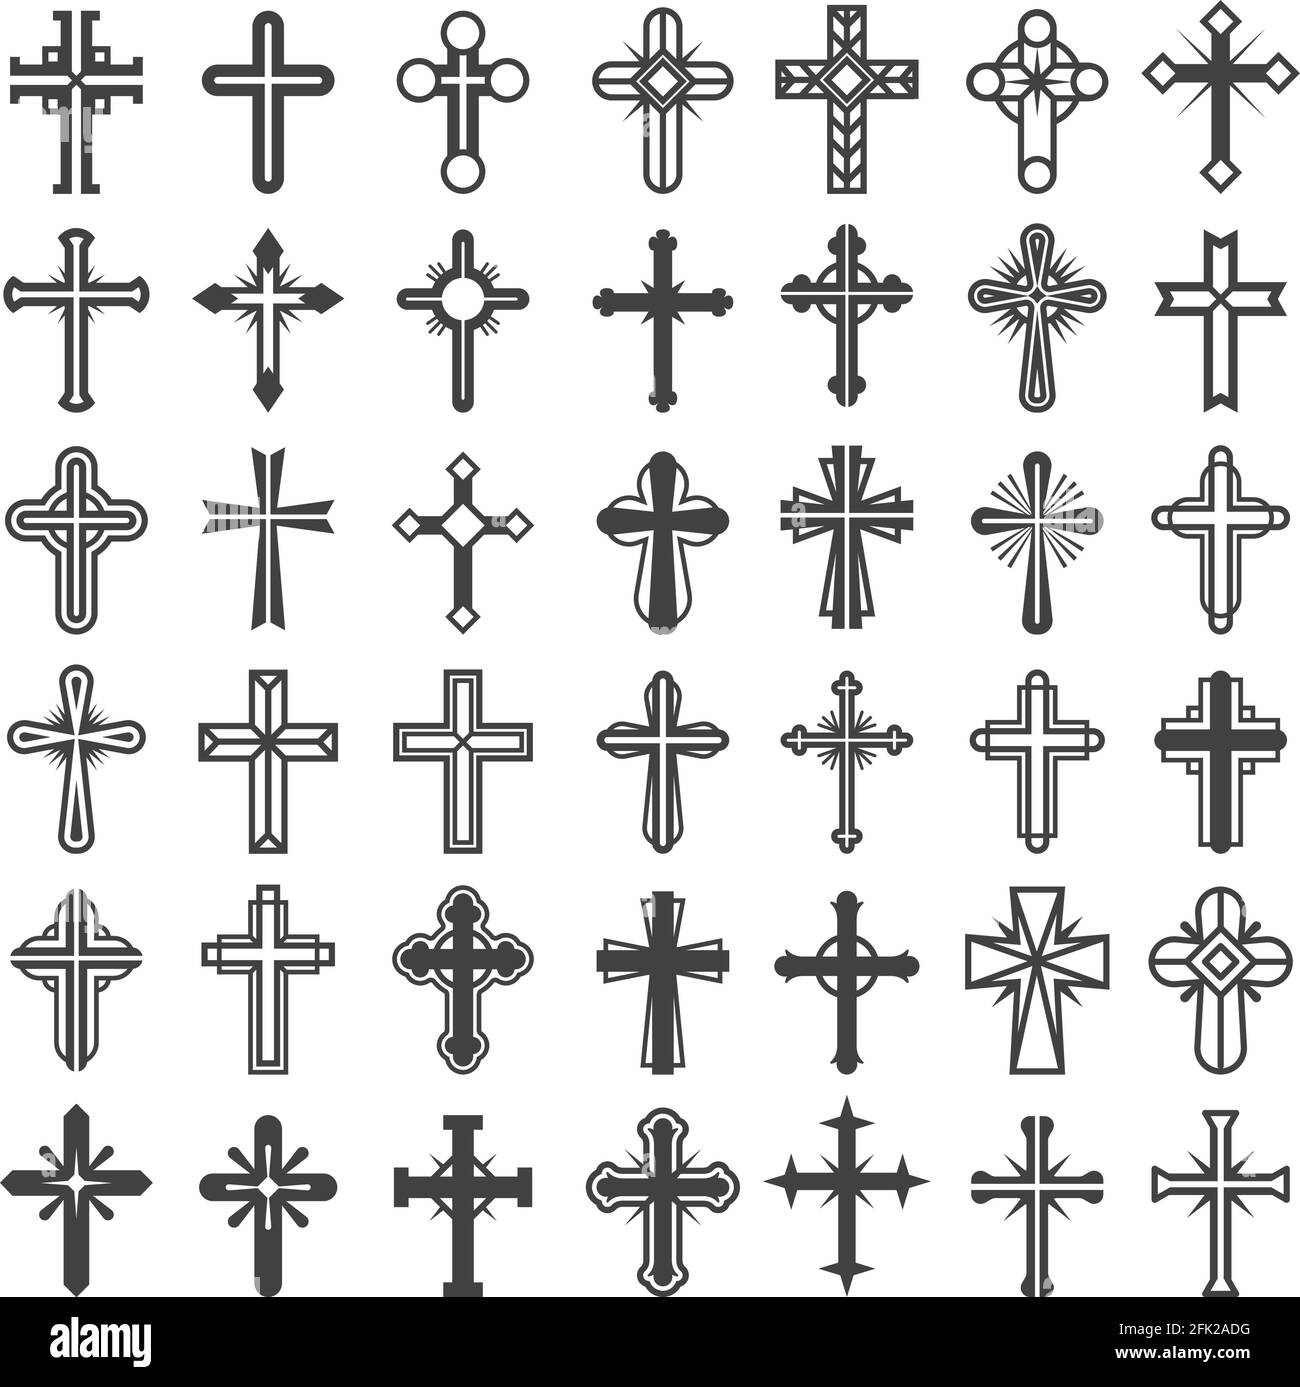 Religion cross symbols. Christians catholicism icons tribal vector collection peace jesus pictures Stock Vector